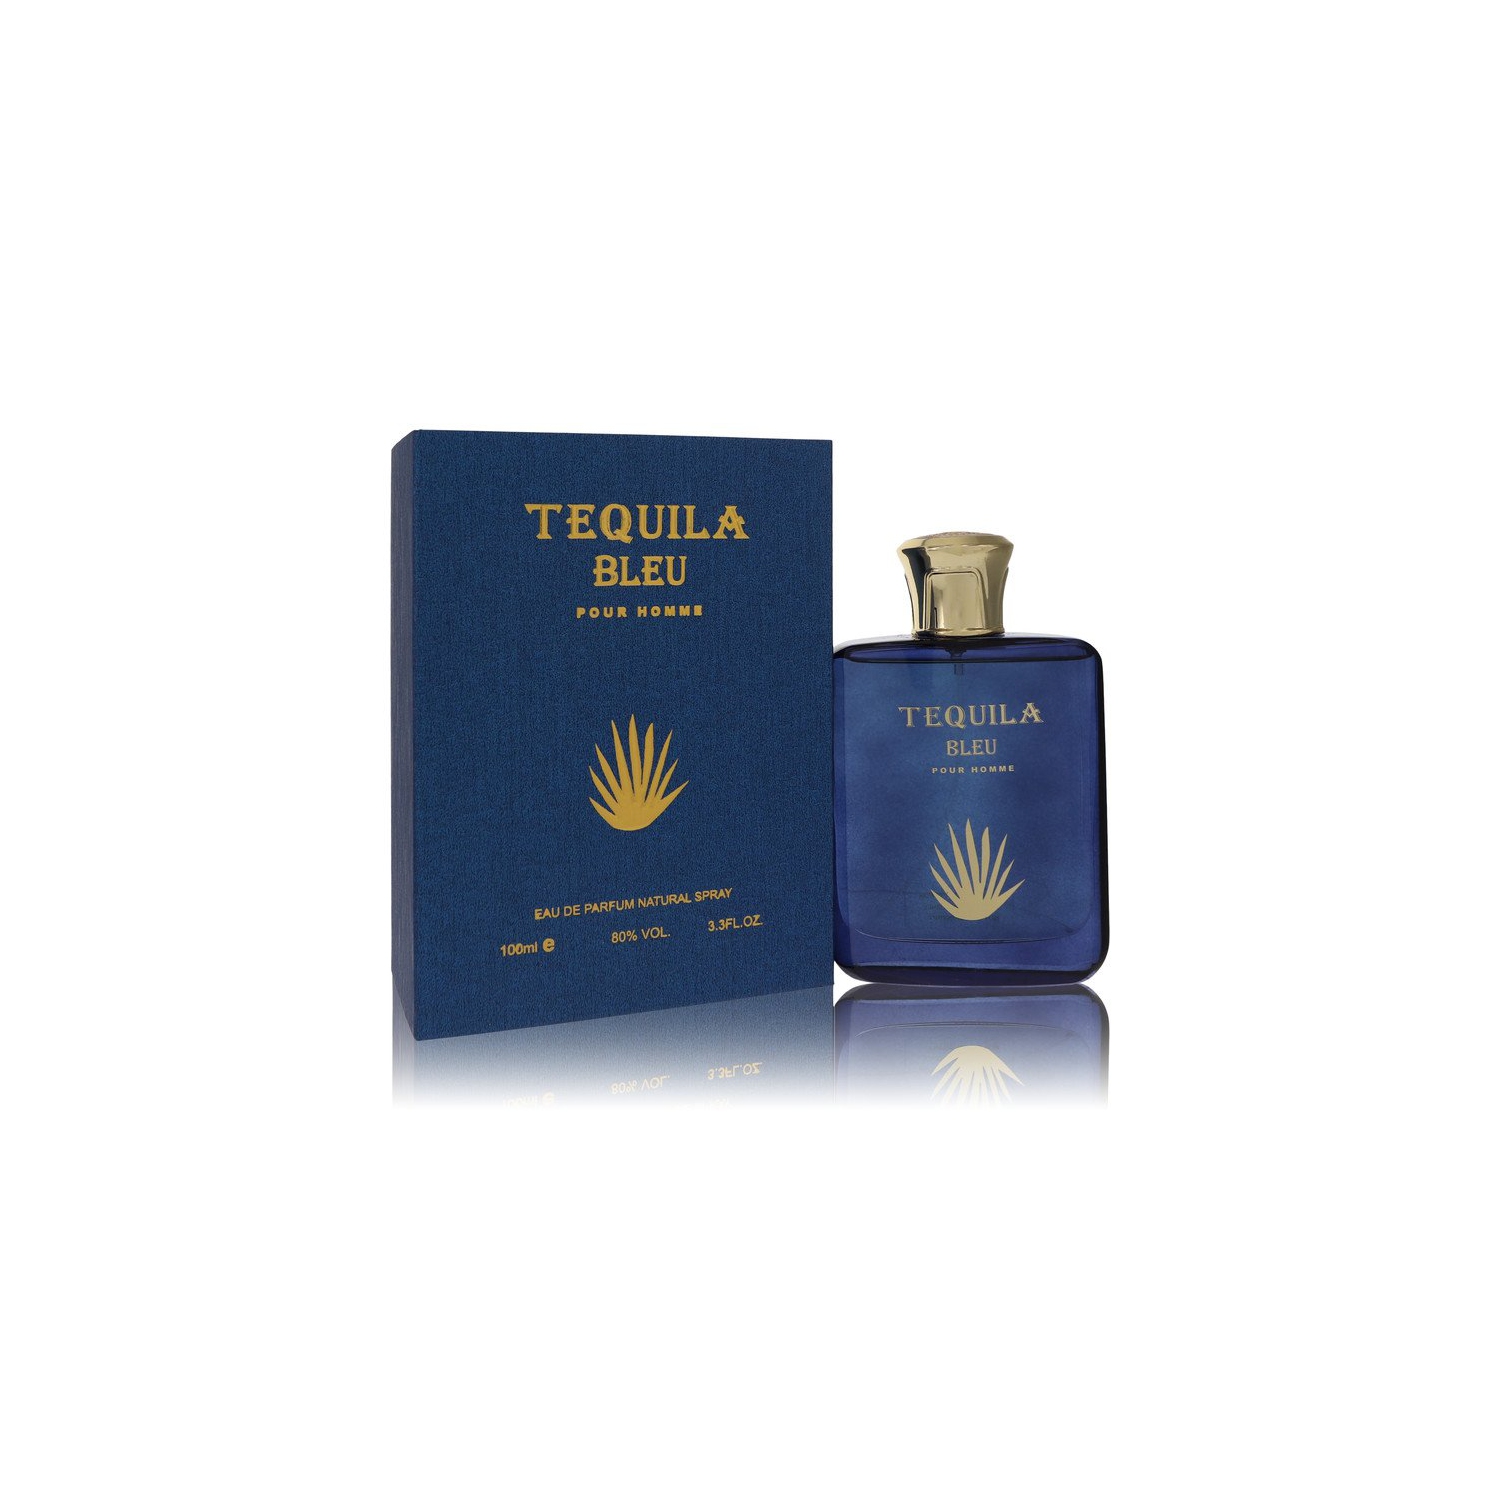 Tequila Pour Homme Bleu by Tequila Perfumes